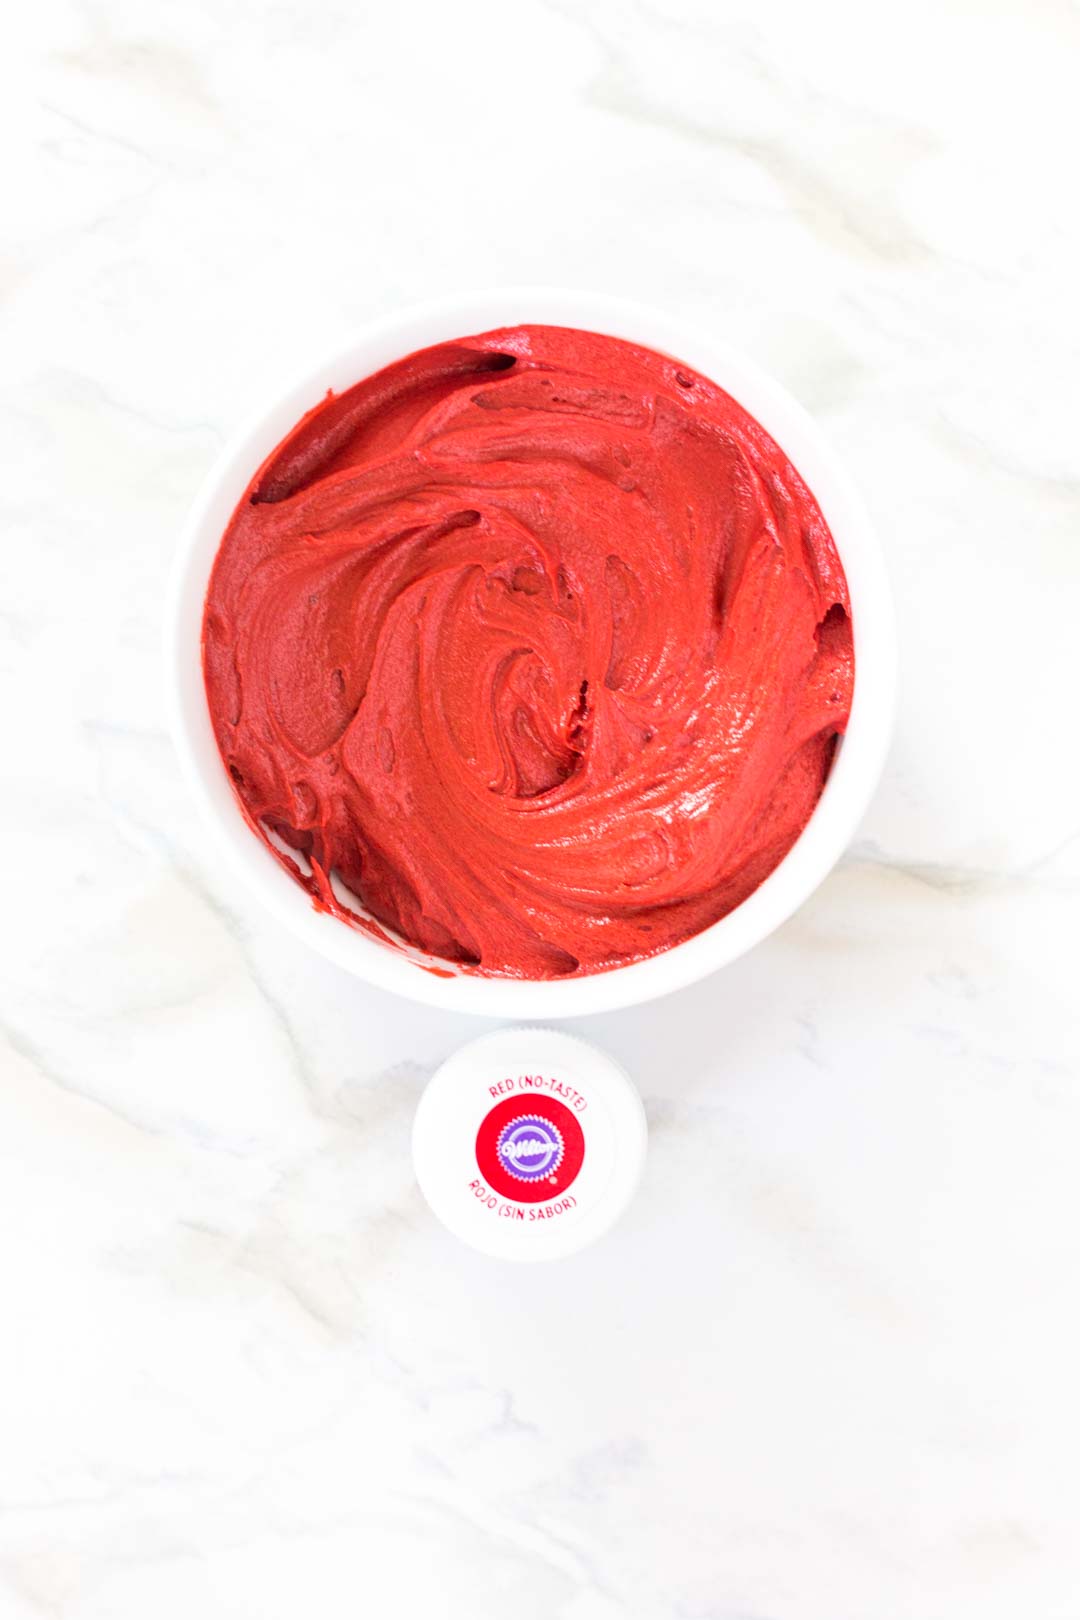 Coloring buttercream red with wilton no taste red color